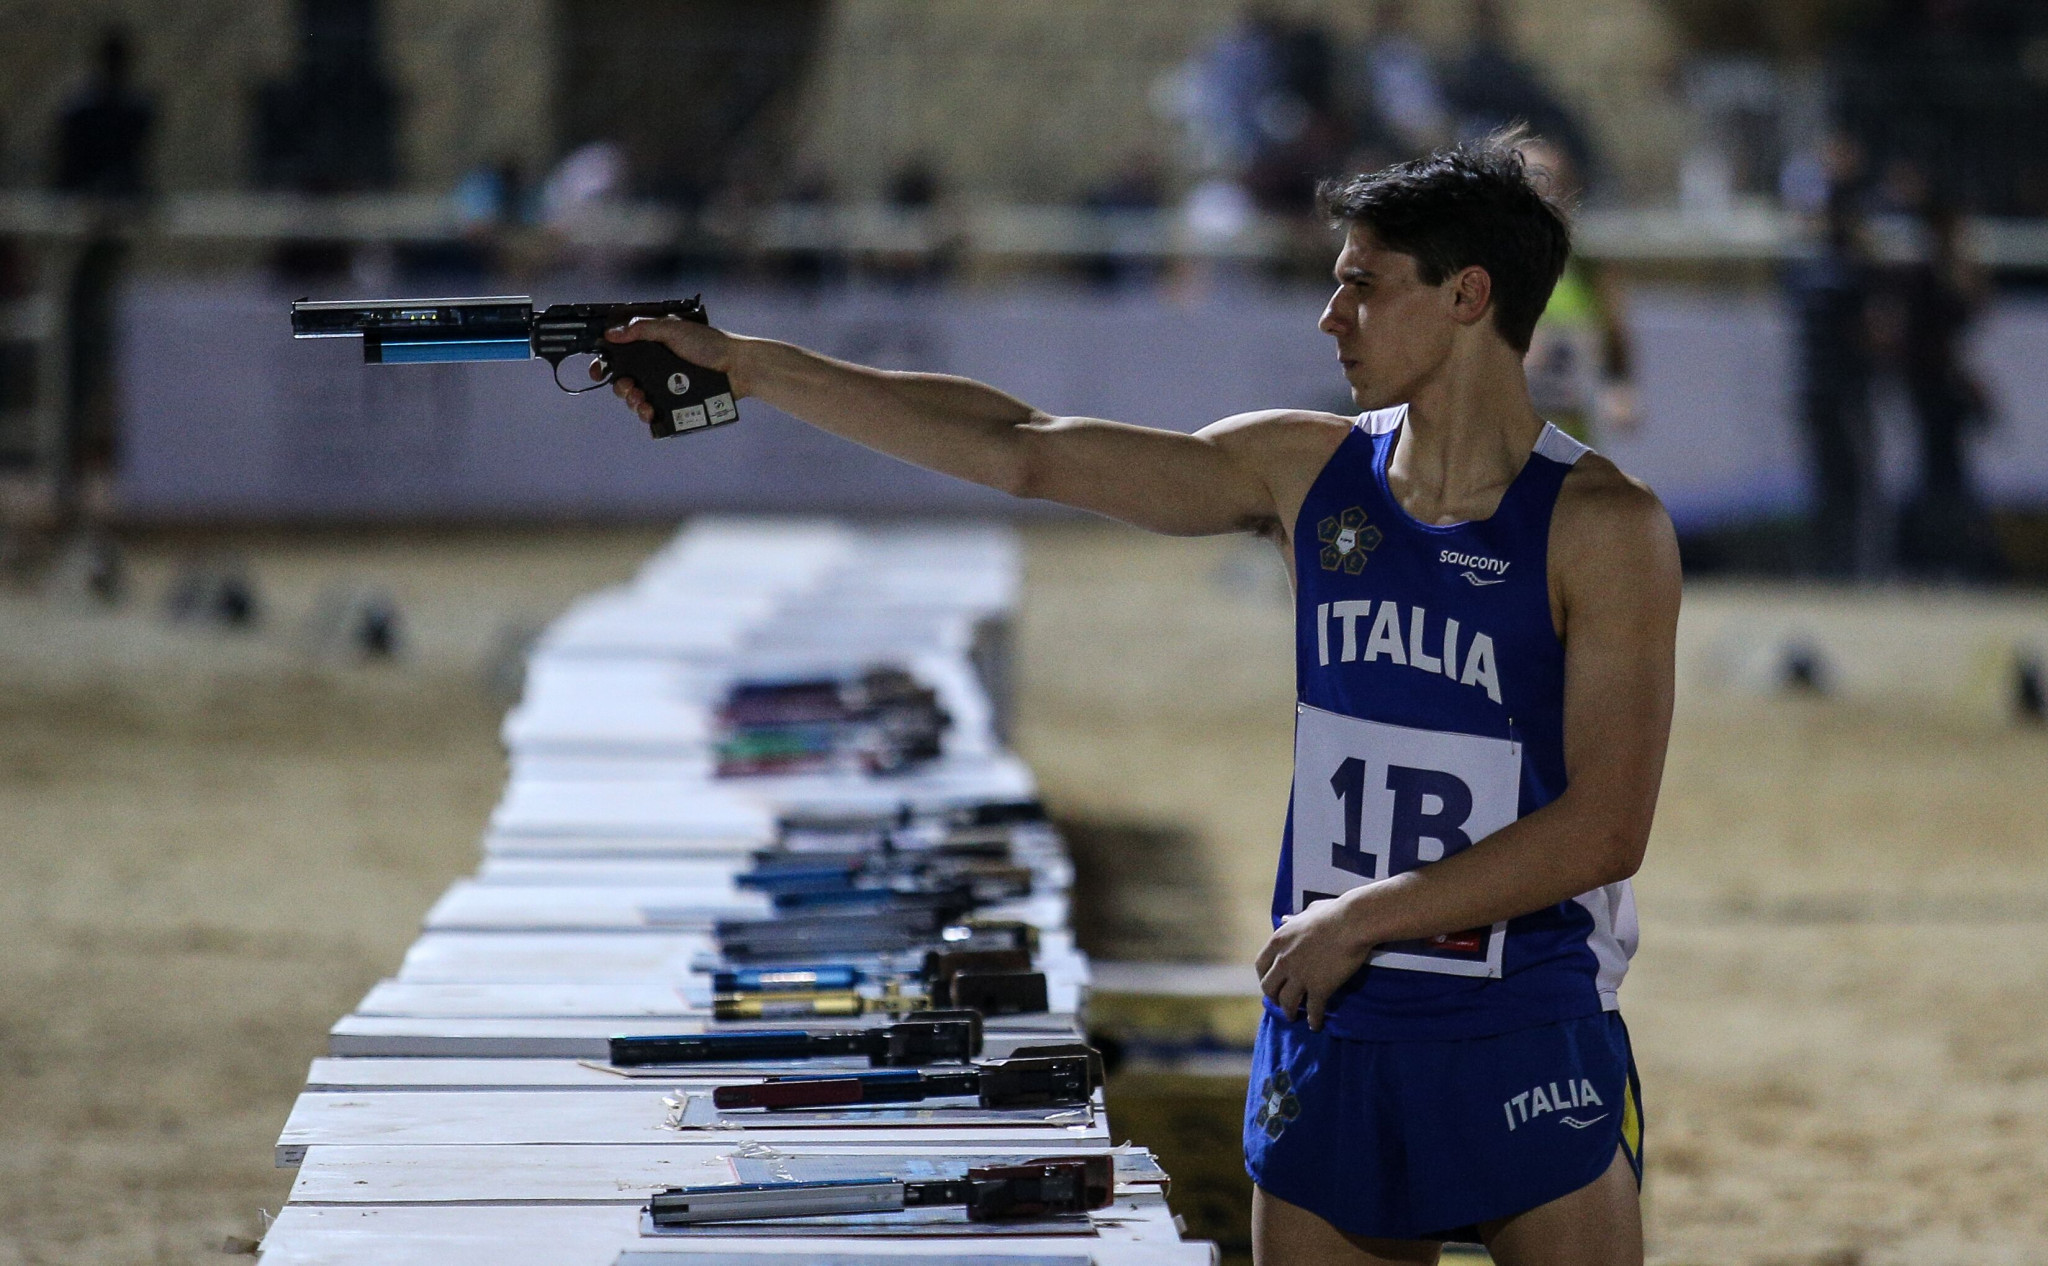 Gianluca Micozzi's gold medal in the mixed relay at the UIPM World Cup in Cairo, alongside Gloria Tocchi, represented a breakthrough at senior level for the Italian youngster ©UIPM 